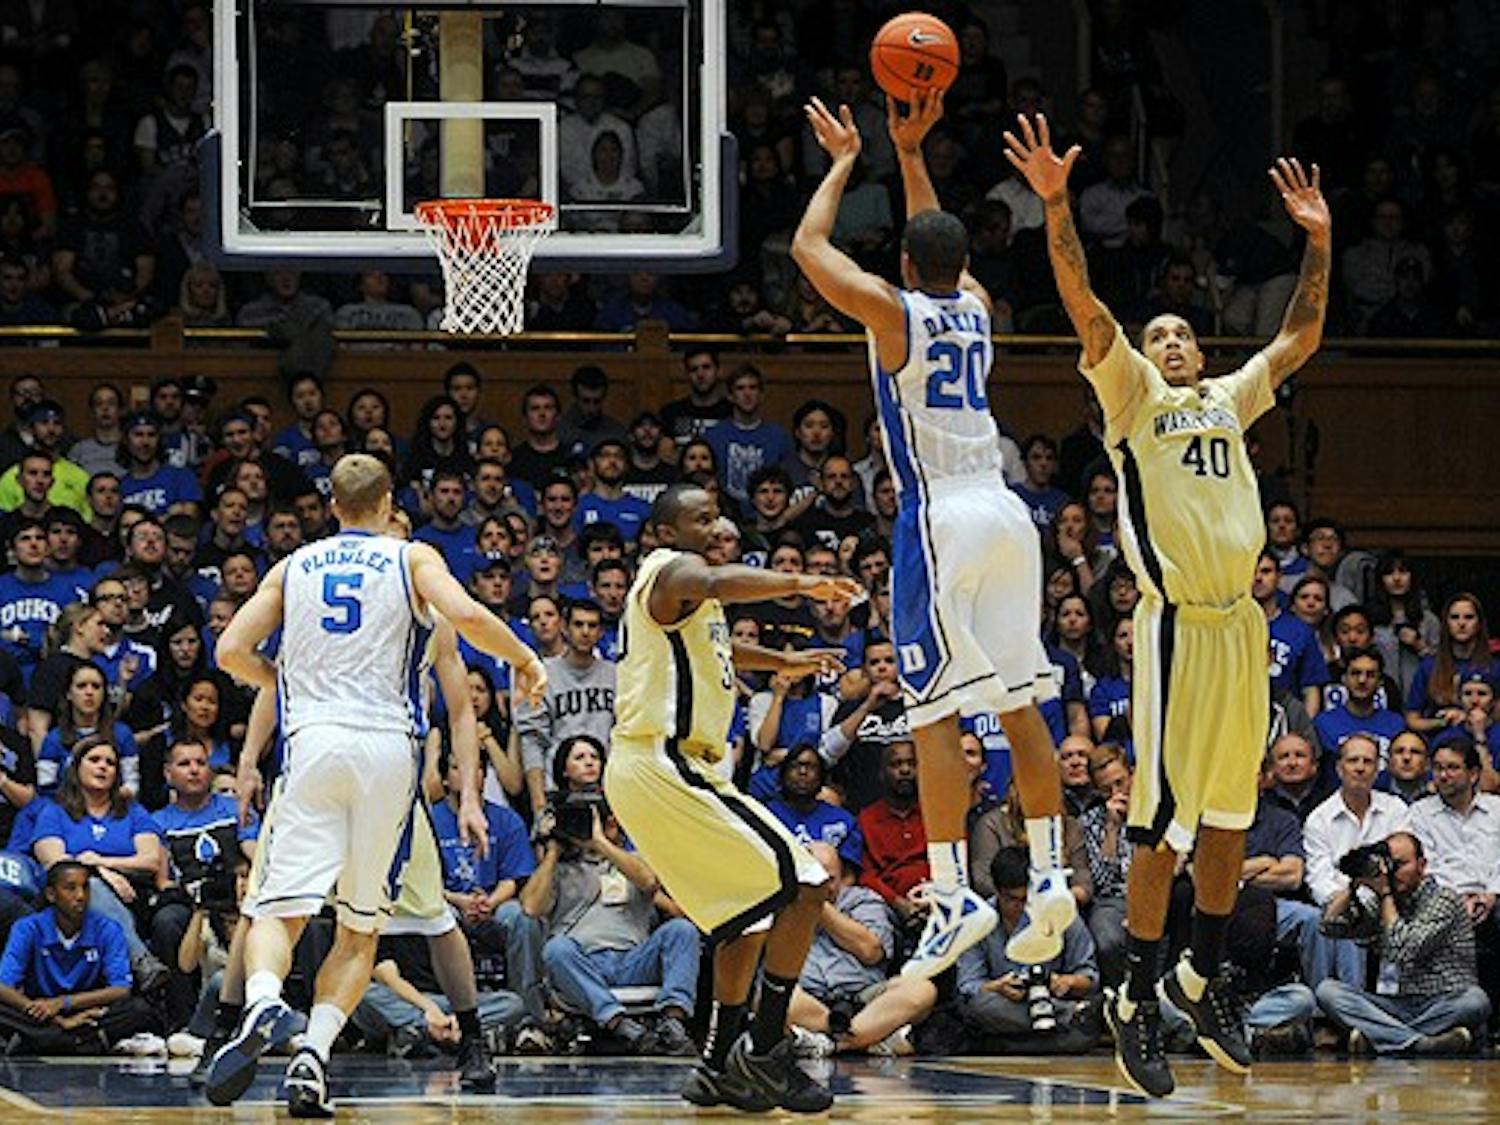 Junior Andre Dawkins hit seven 3-pointers in the first half as Duke downed ACC rival Wake Forest, 91-73.